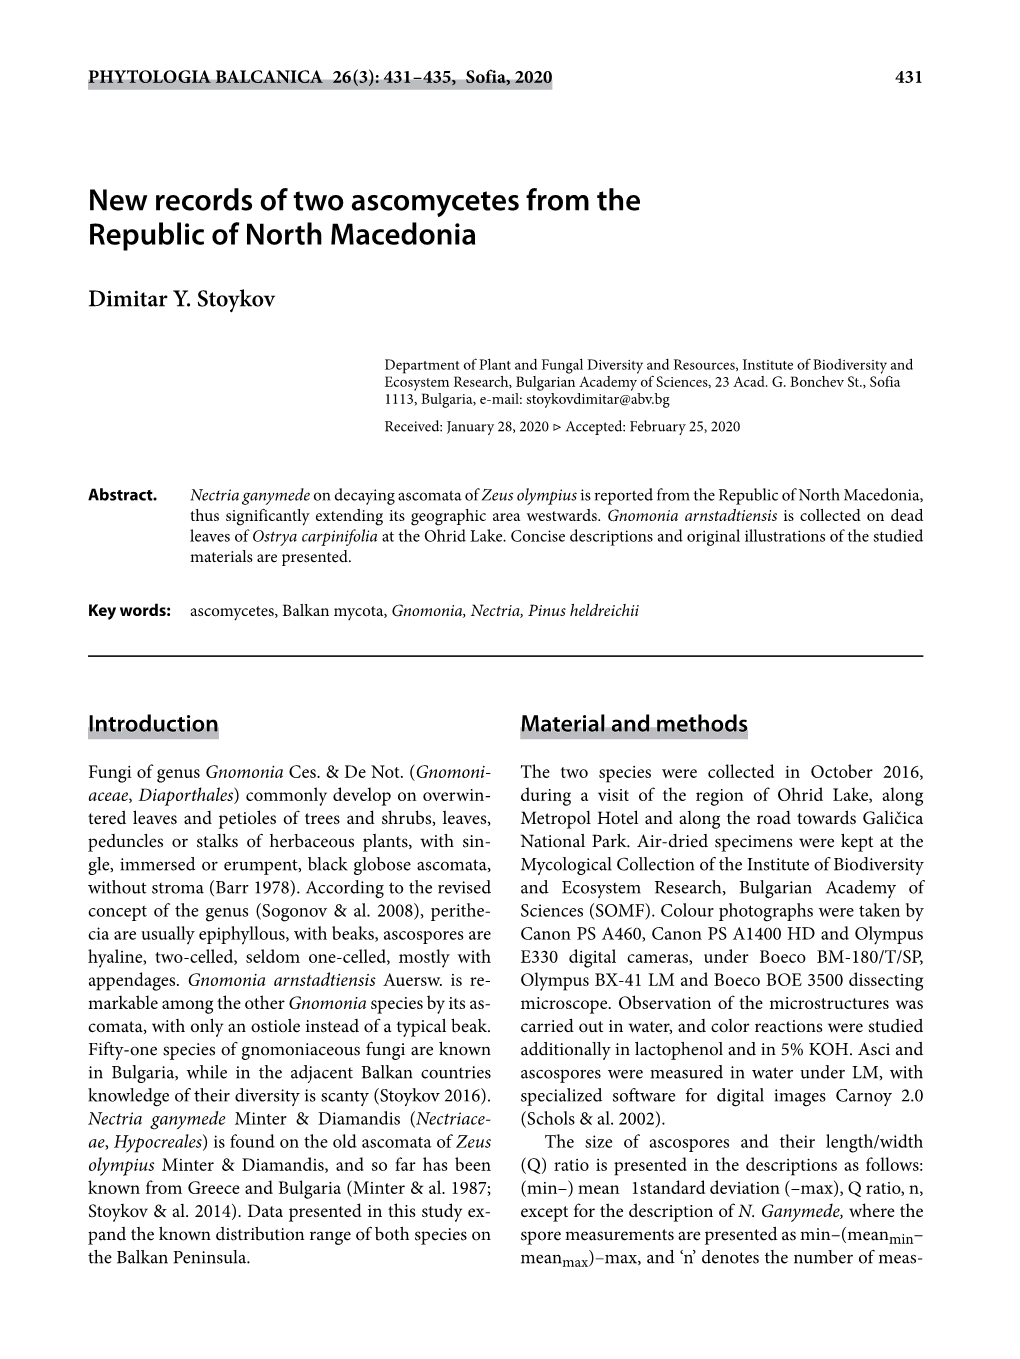 New Records of Two Ascomycetes from the Republic of North Macedonia